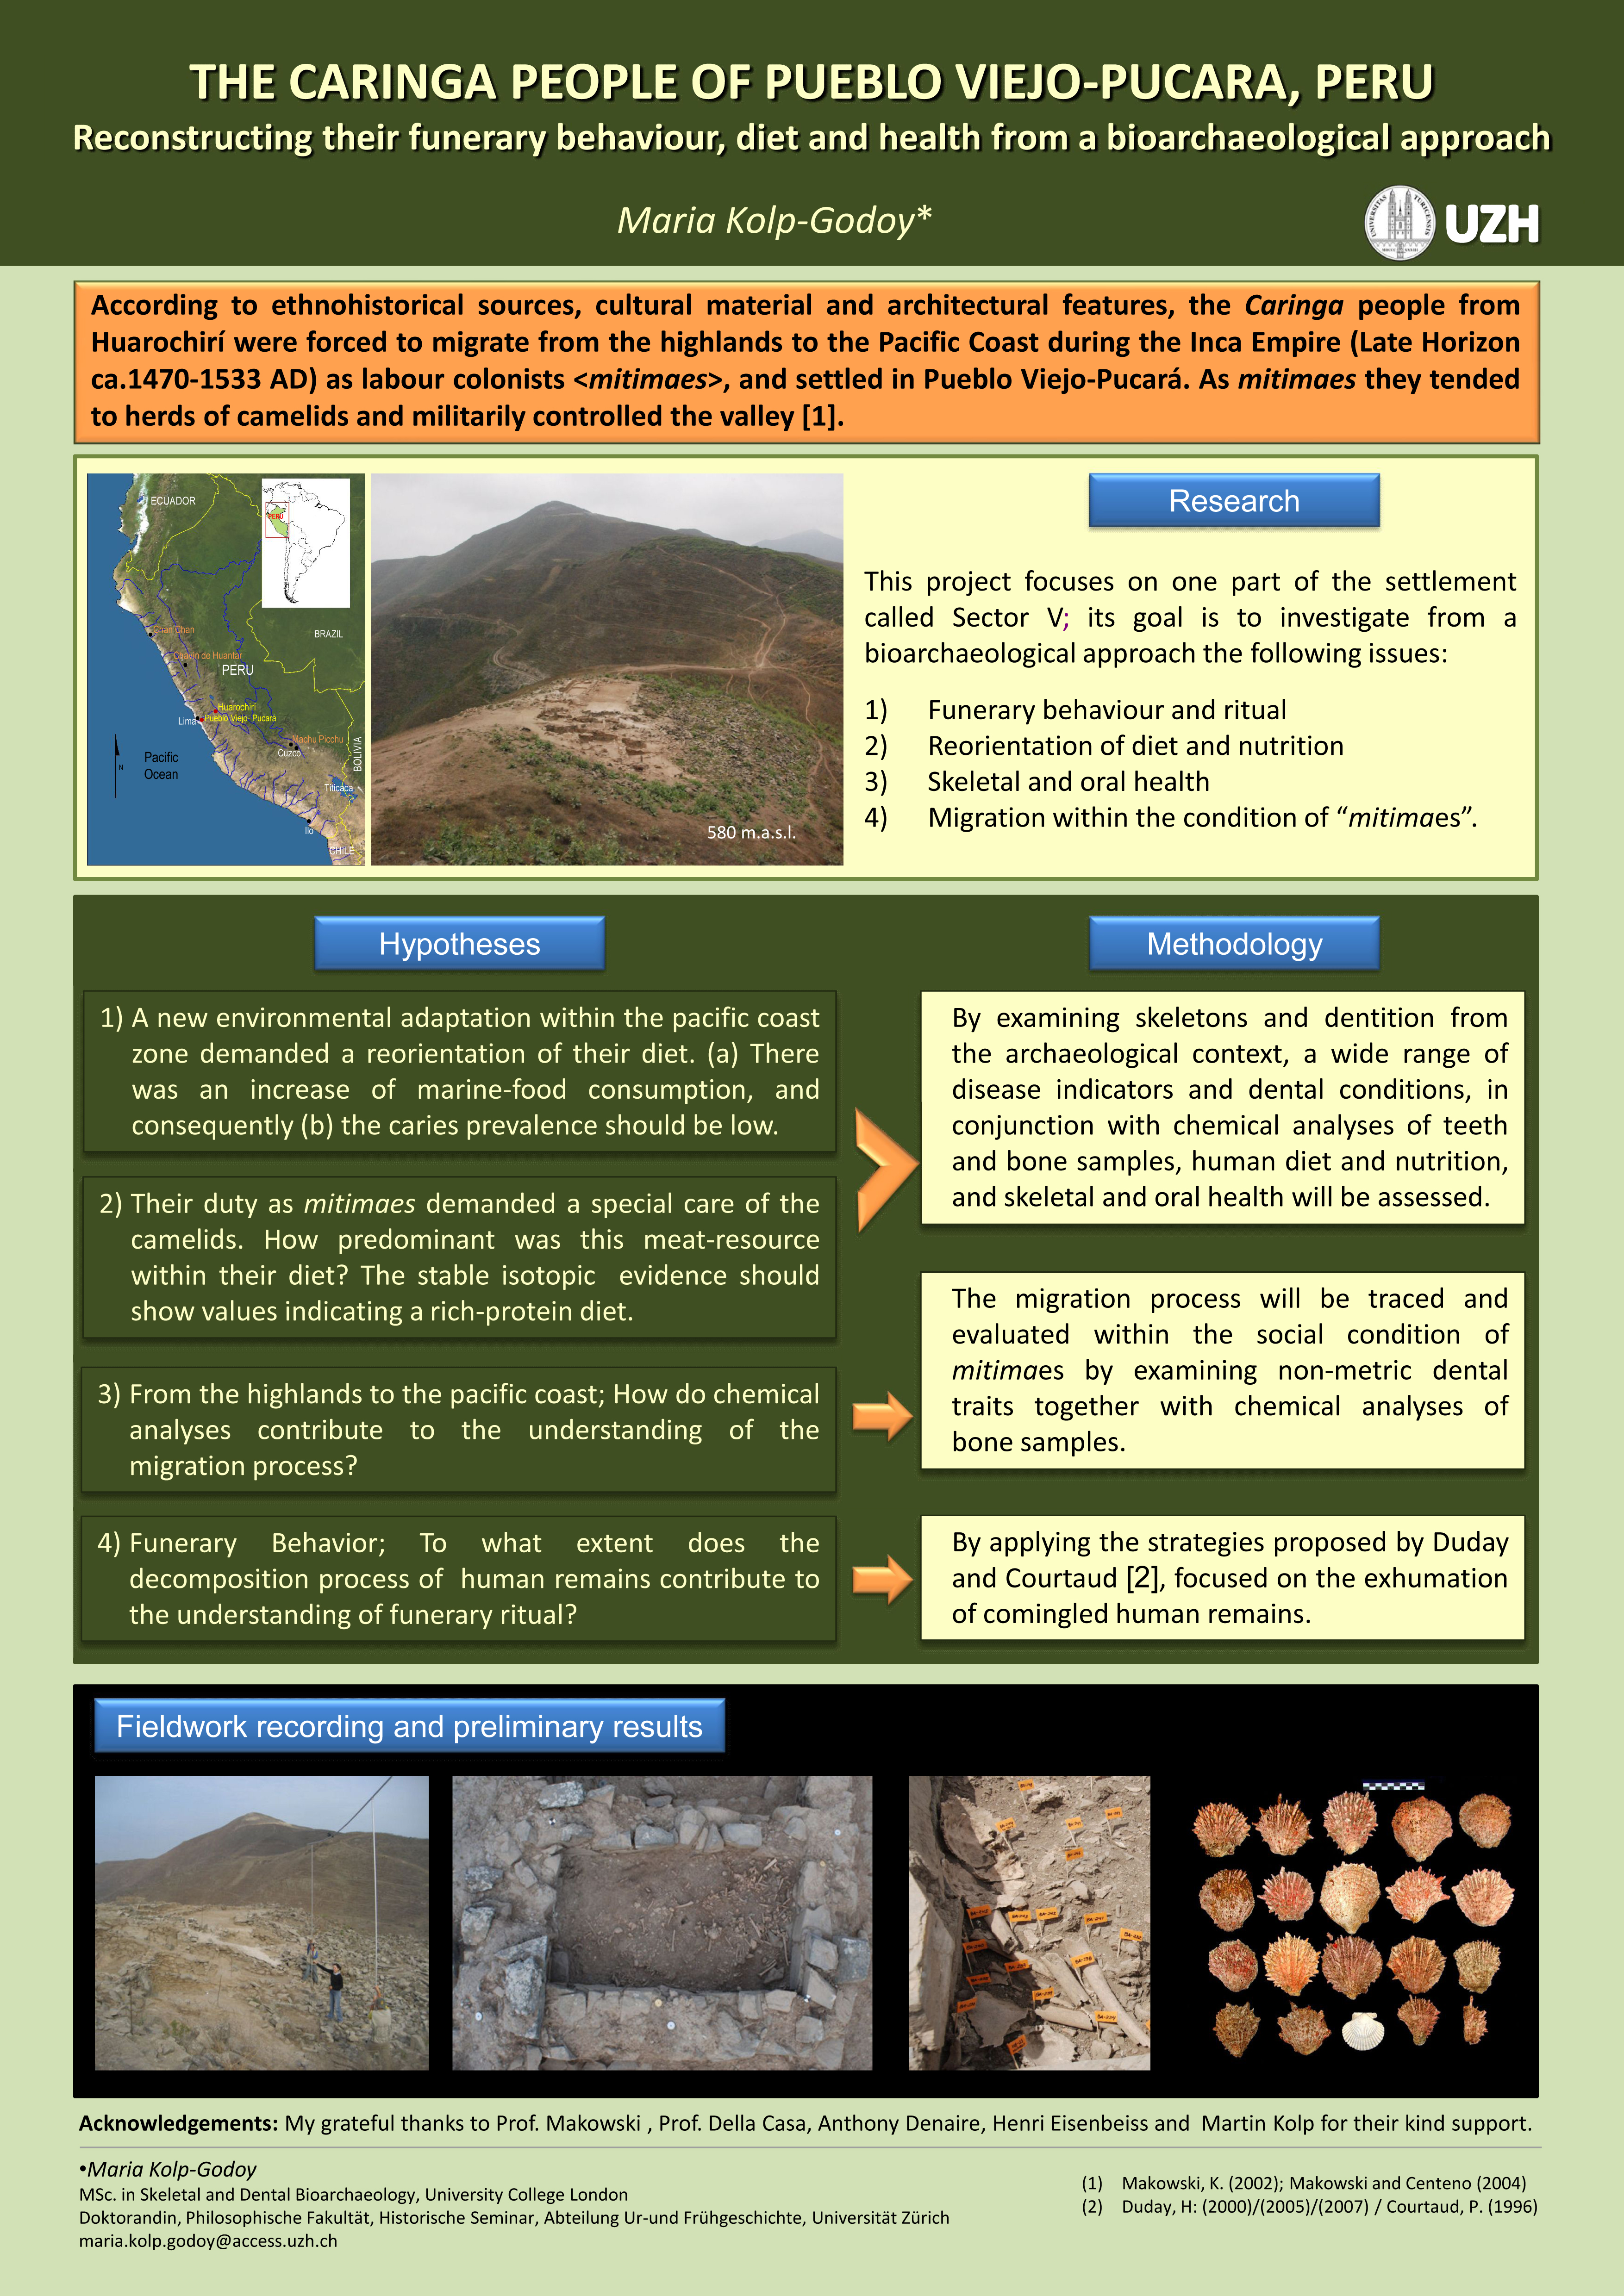 Maria KOLP-GODOY: The Caringa people of pueblo Viejo-Pucara, Peru. Reconstructing their funerary behaviour, diet and health from a bioarchaeological approach.